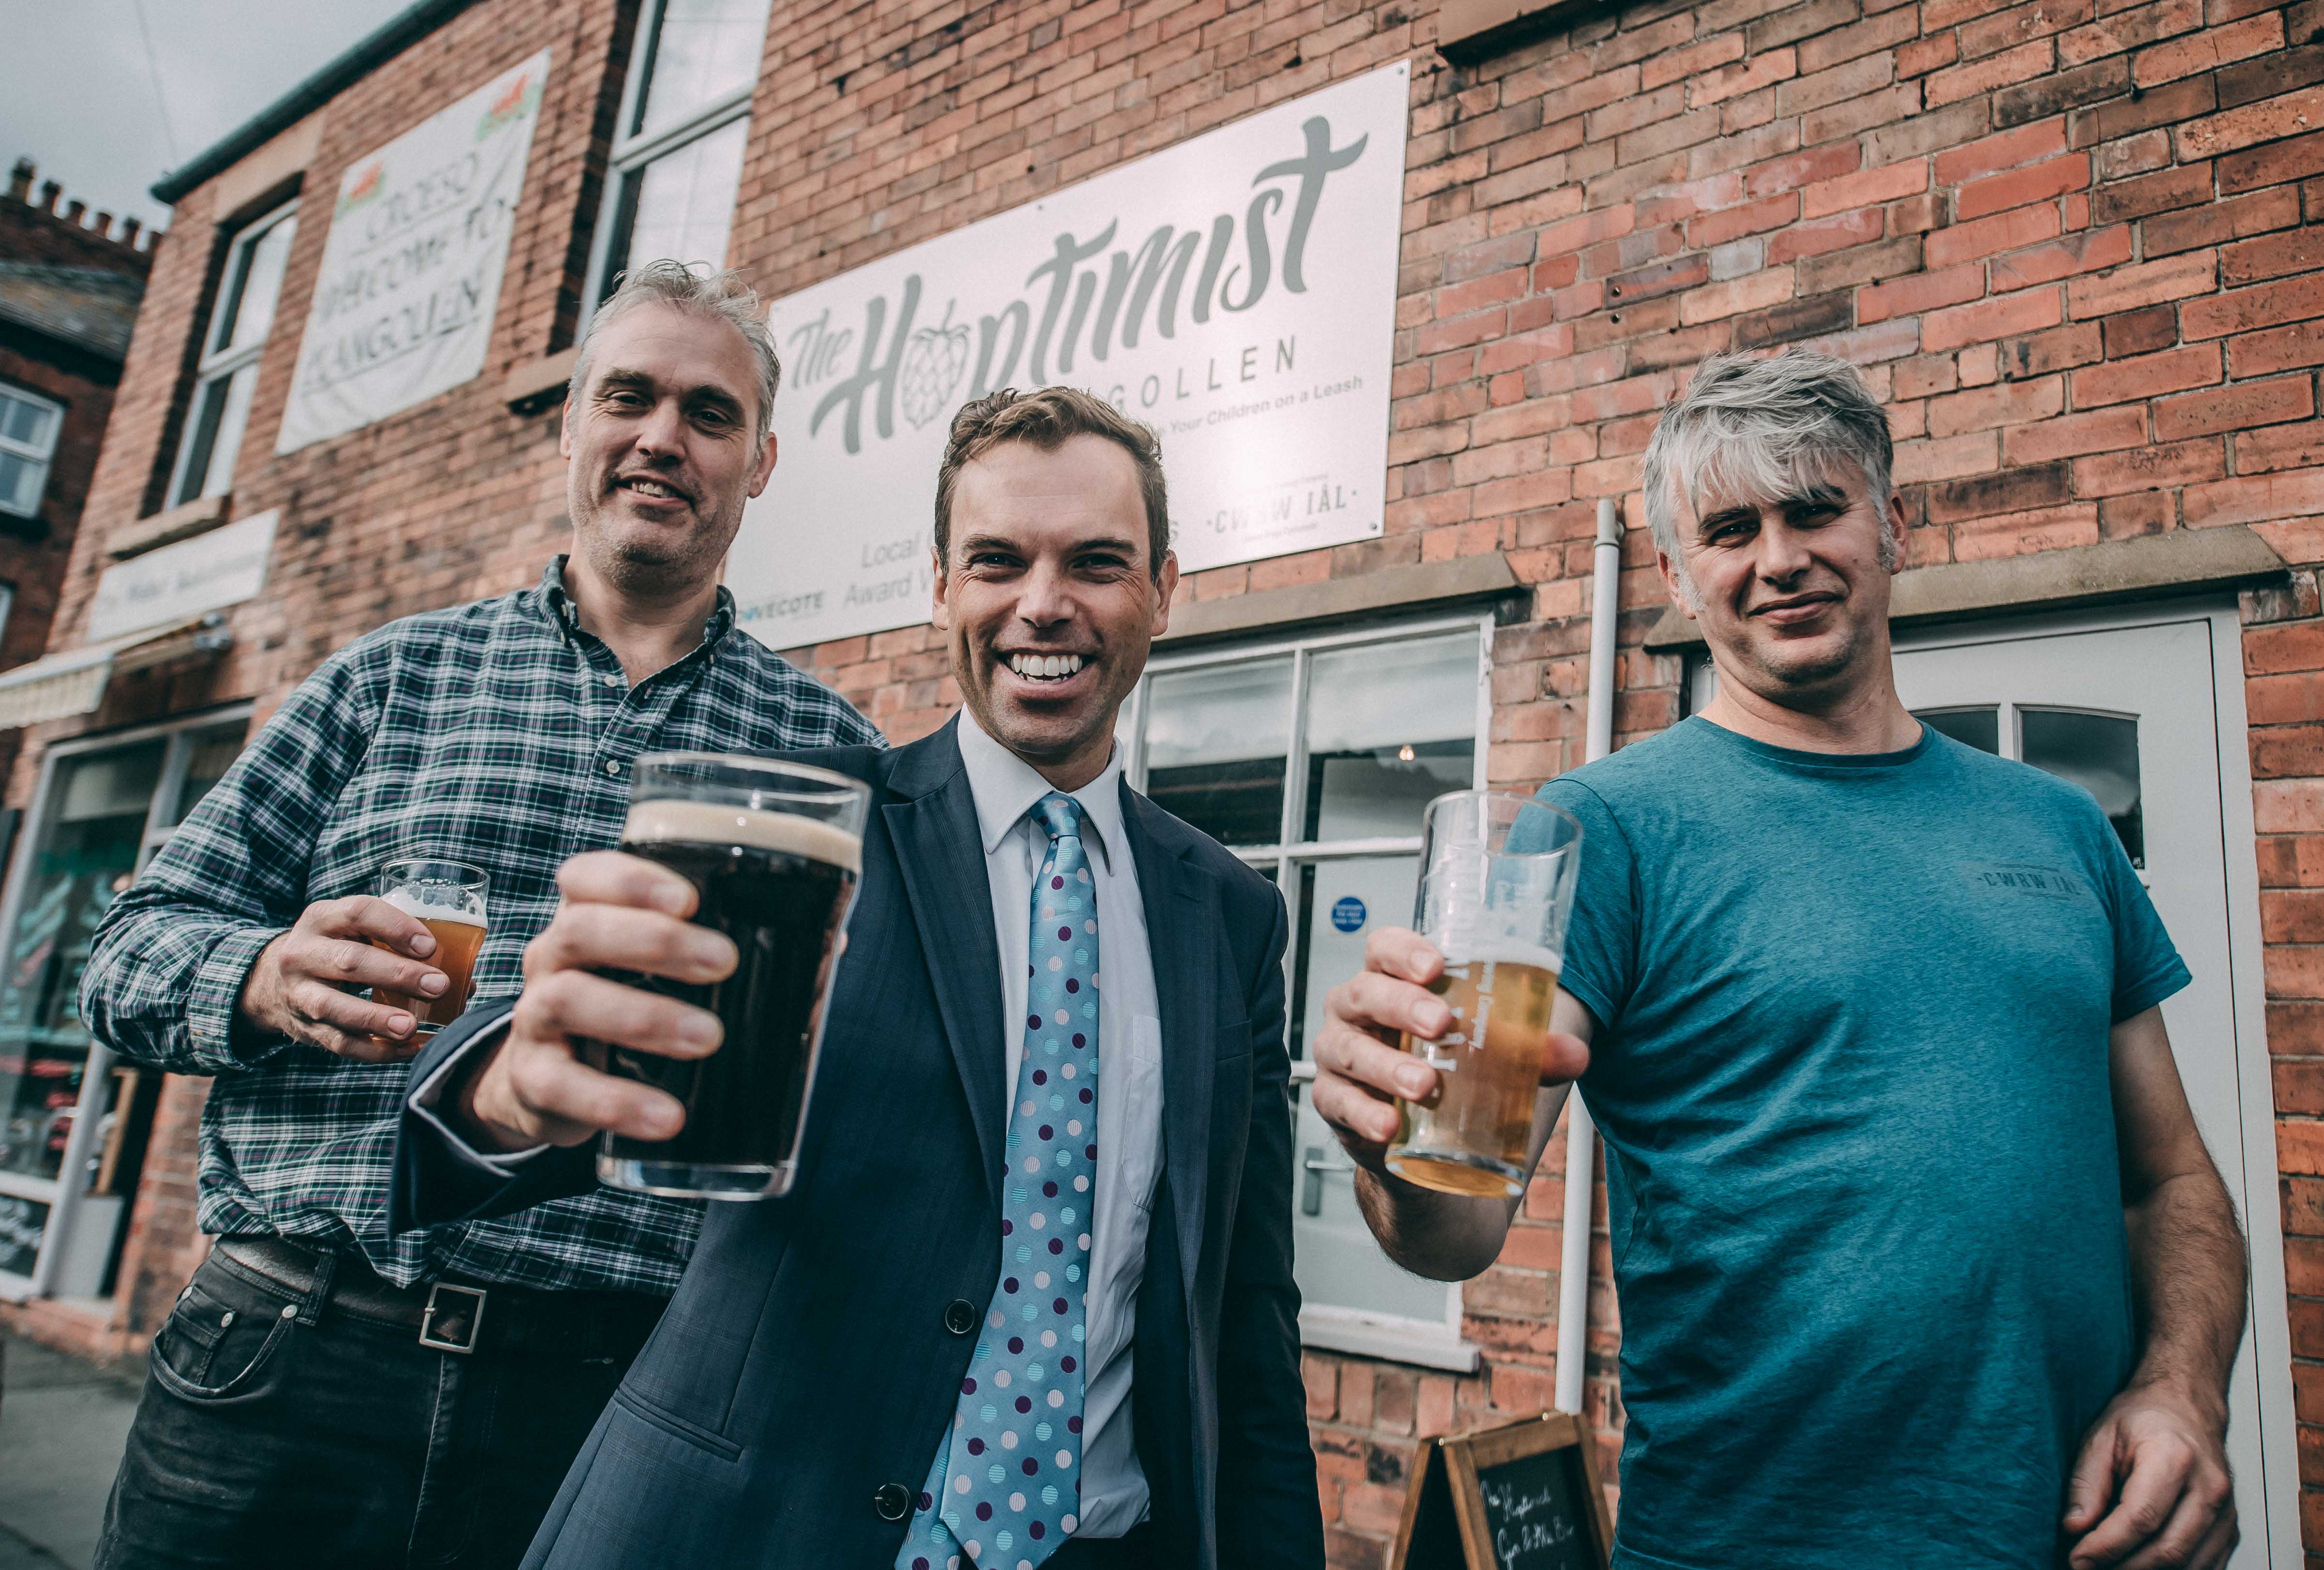 New micro pub puts the ales in Wales and replaces music with chat